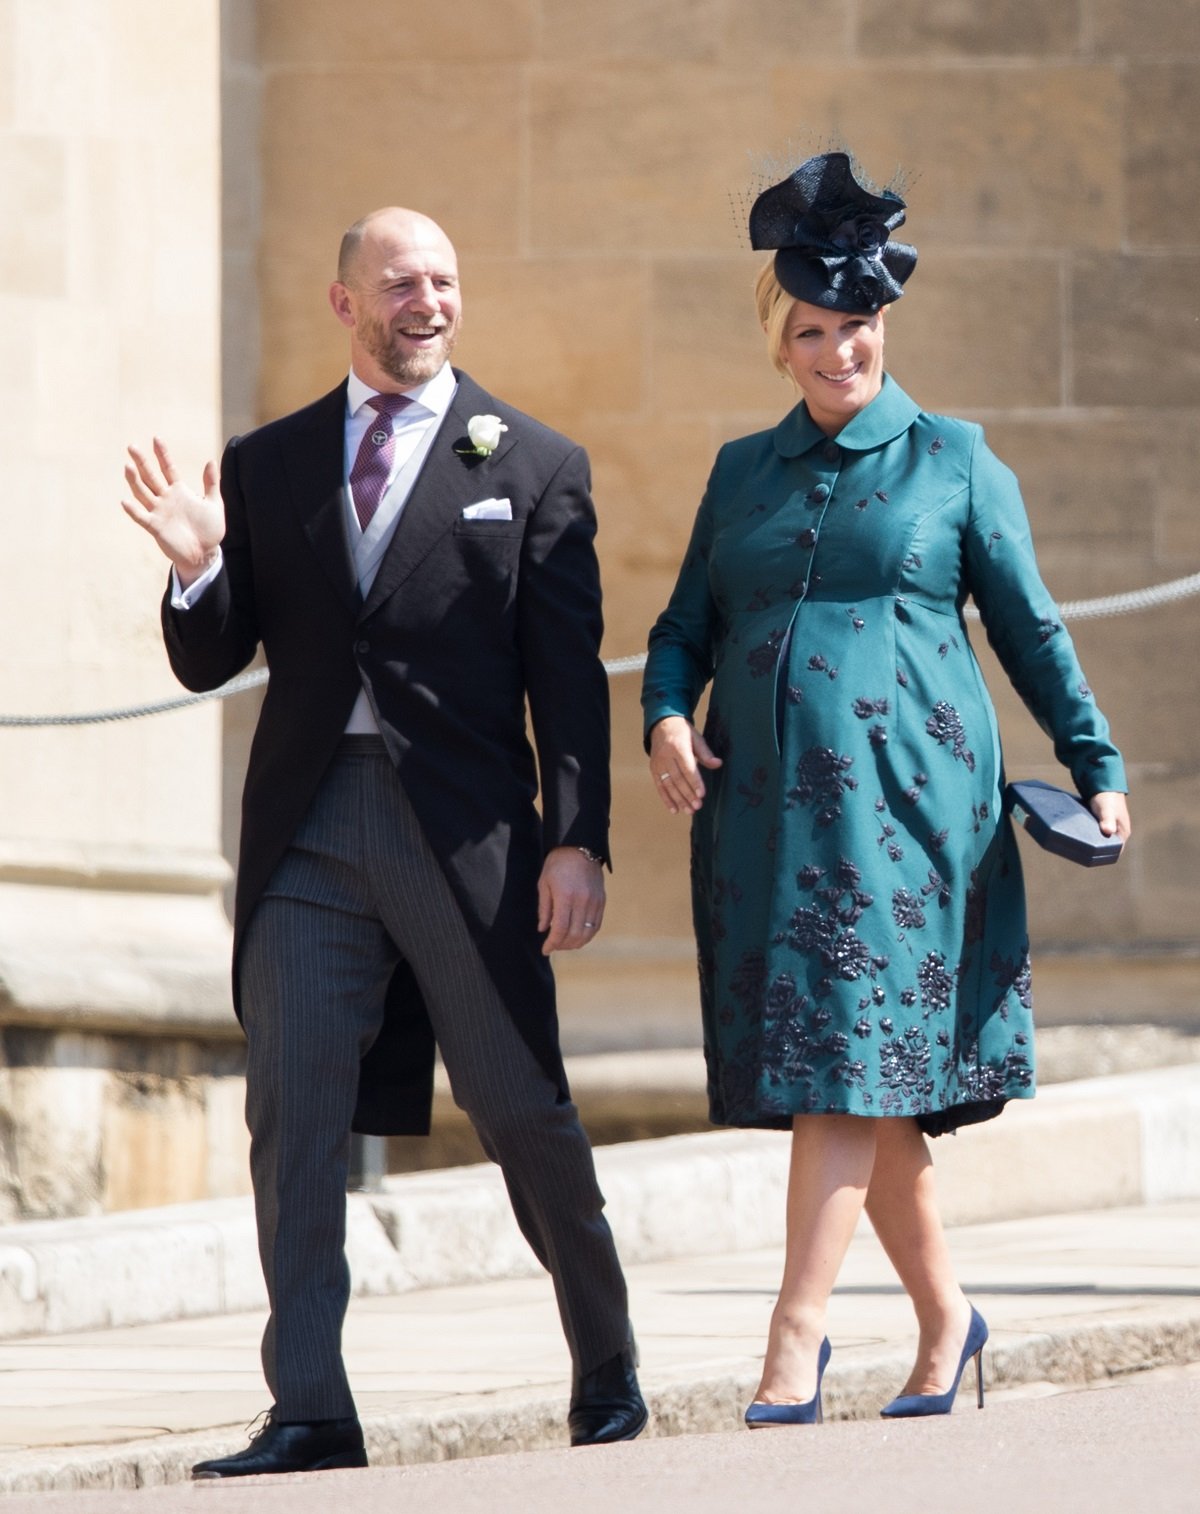 Mike Tindall and Zara Tindall attend the wedding of Prince Harry to Meghan Markle at St George's Chapel, Windsor Castle